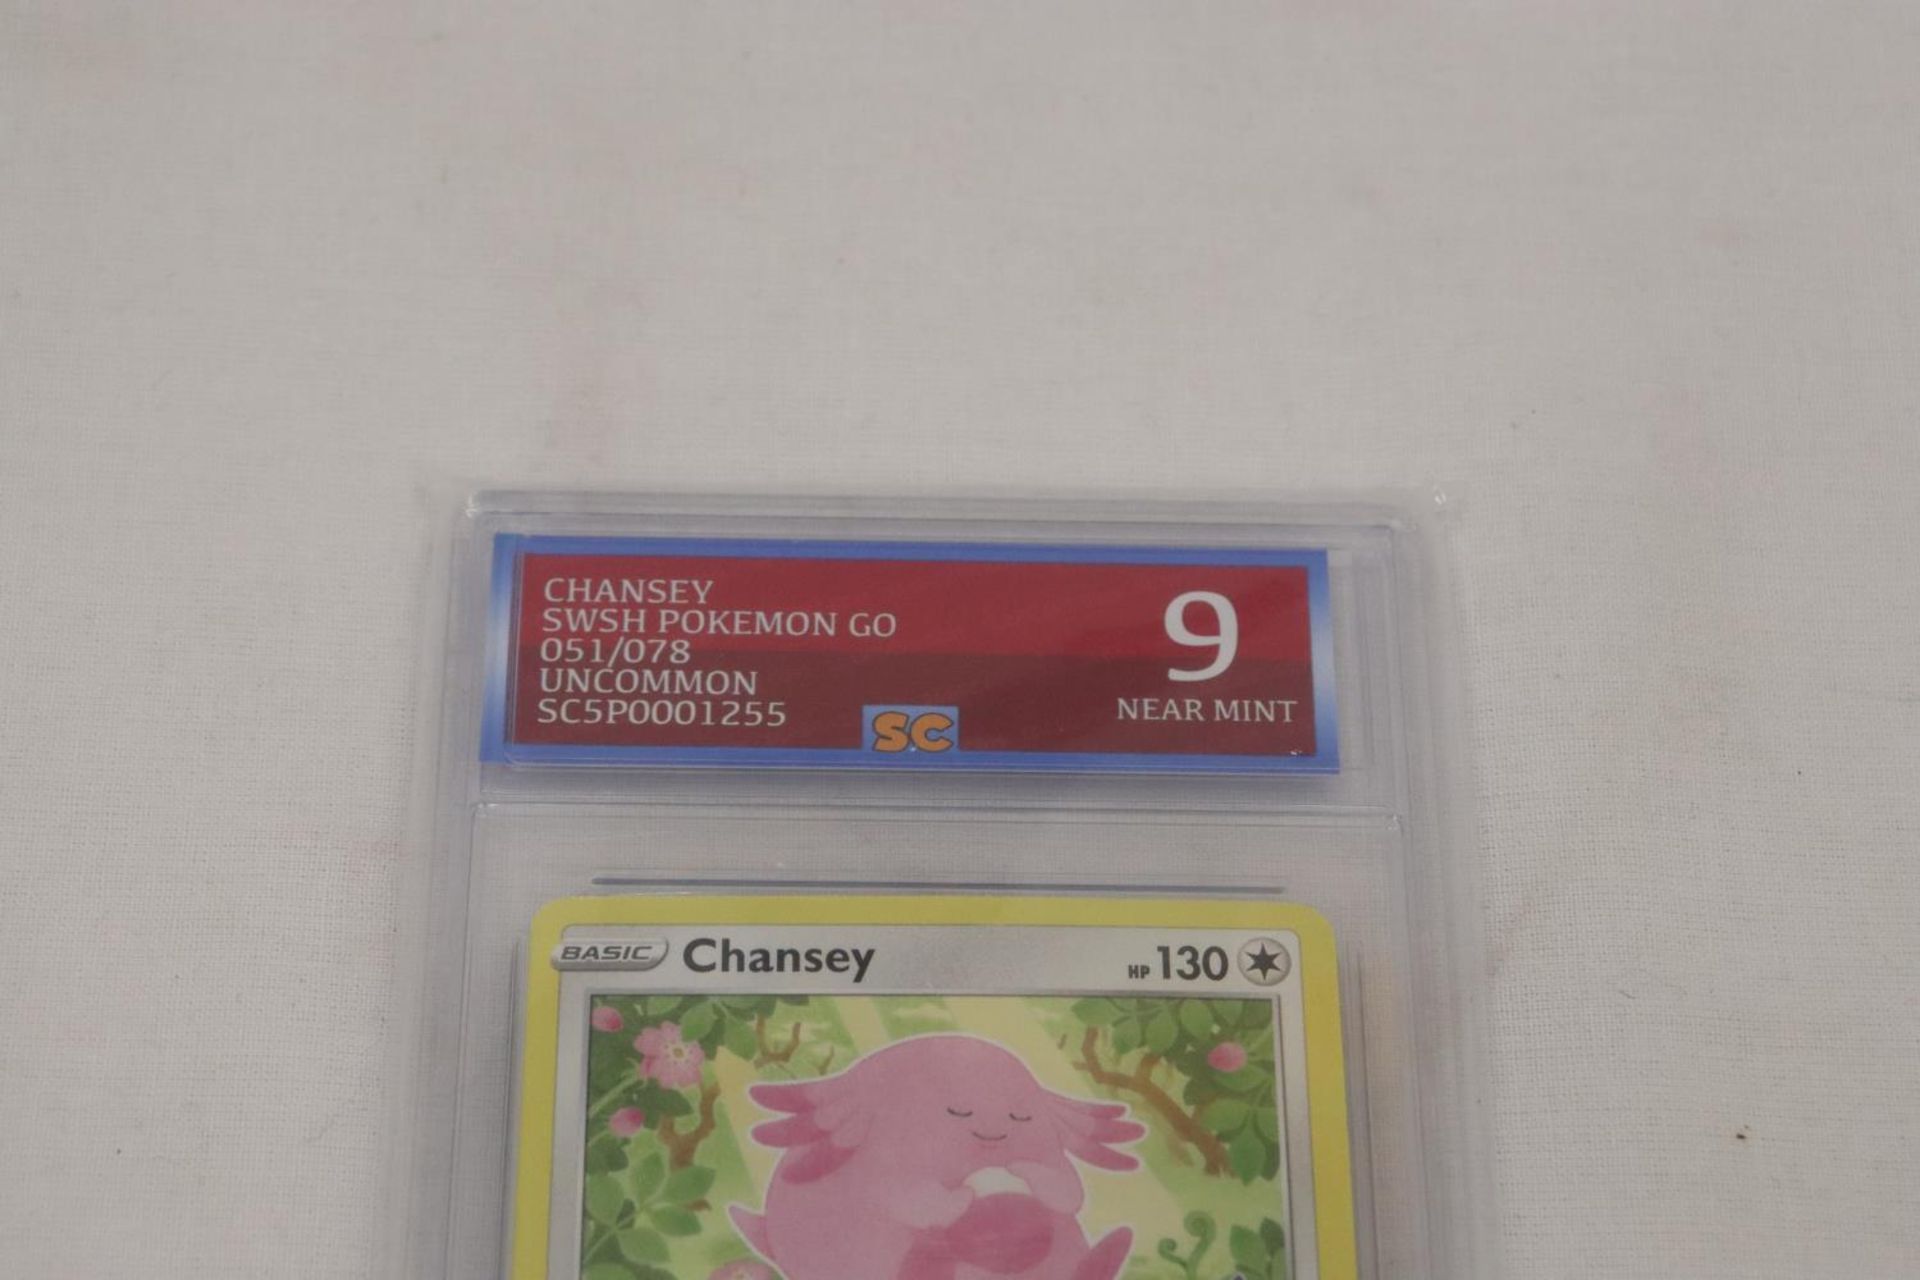 A CHANSEY POKEMON CARD, GRADED NUMBER 9, NEAR MINT - Image 3 of 3